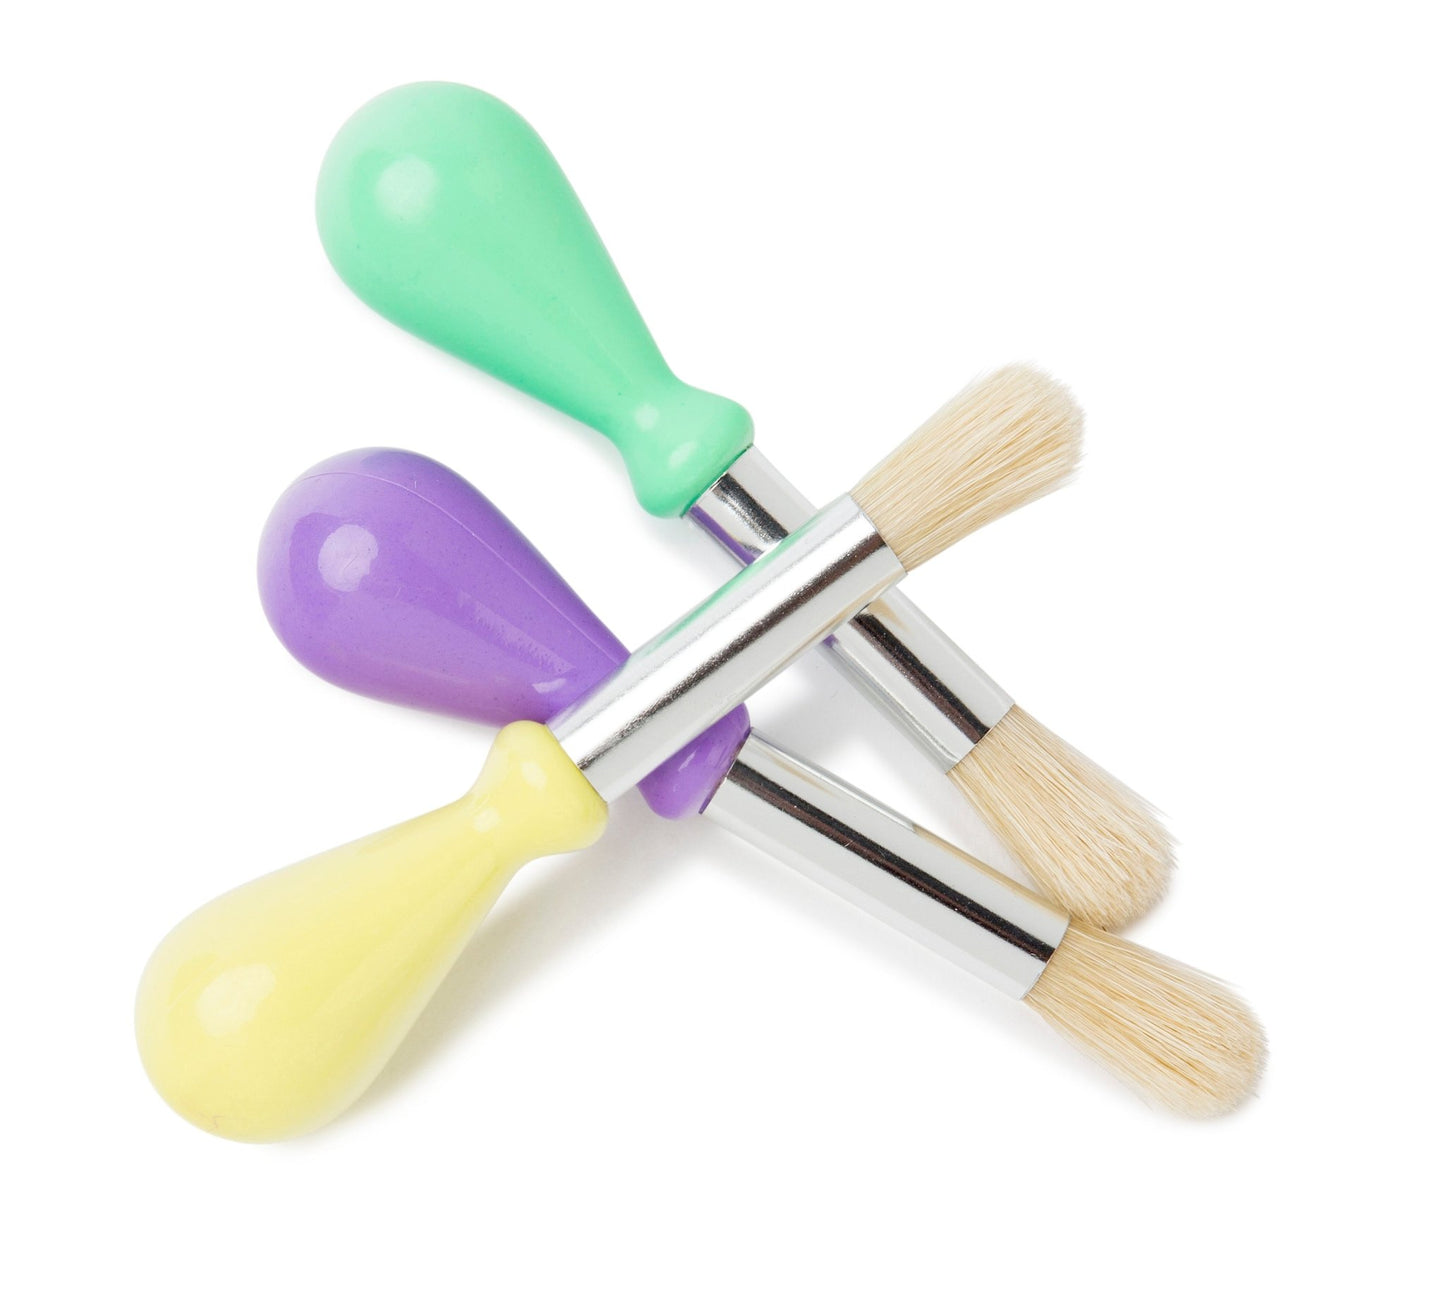 Easi-Grip Paint Brushes Set of 3 - www.creativeplayresources.com.au